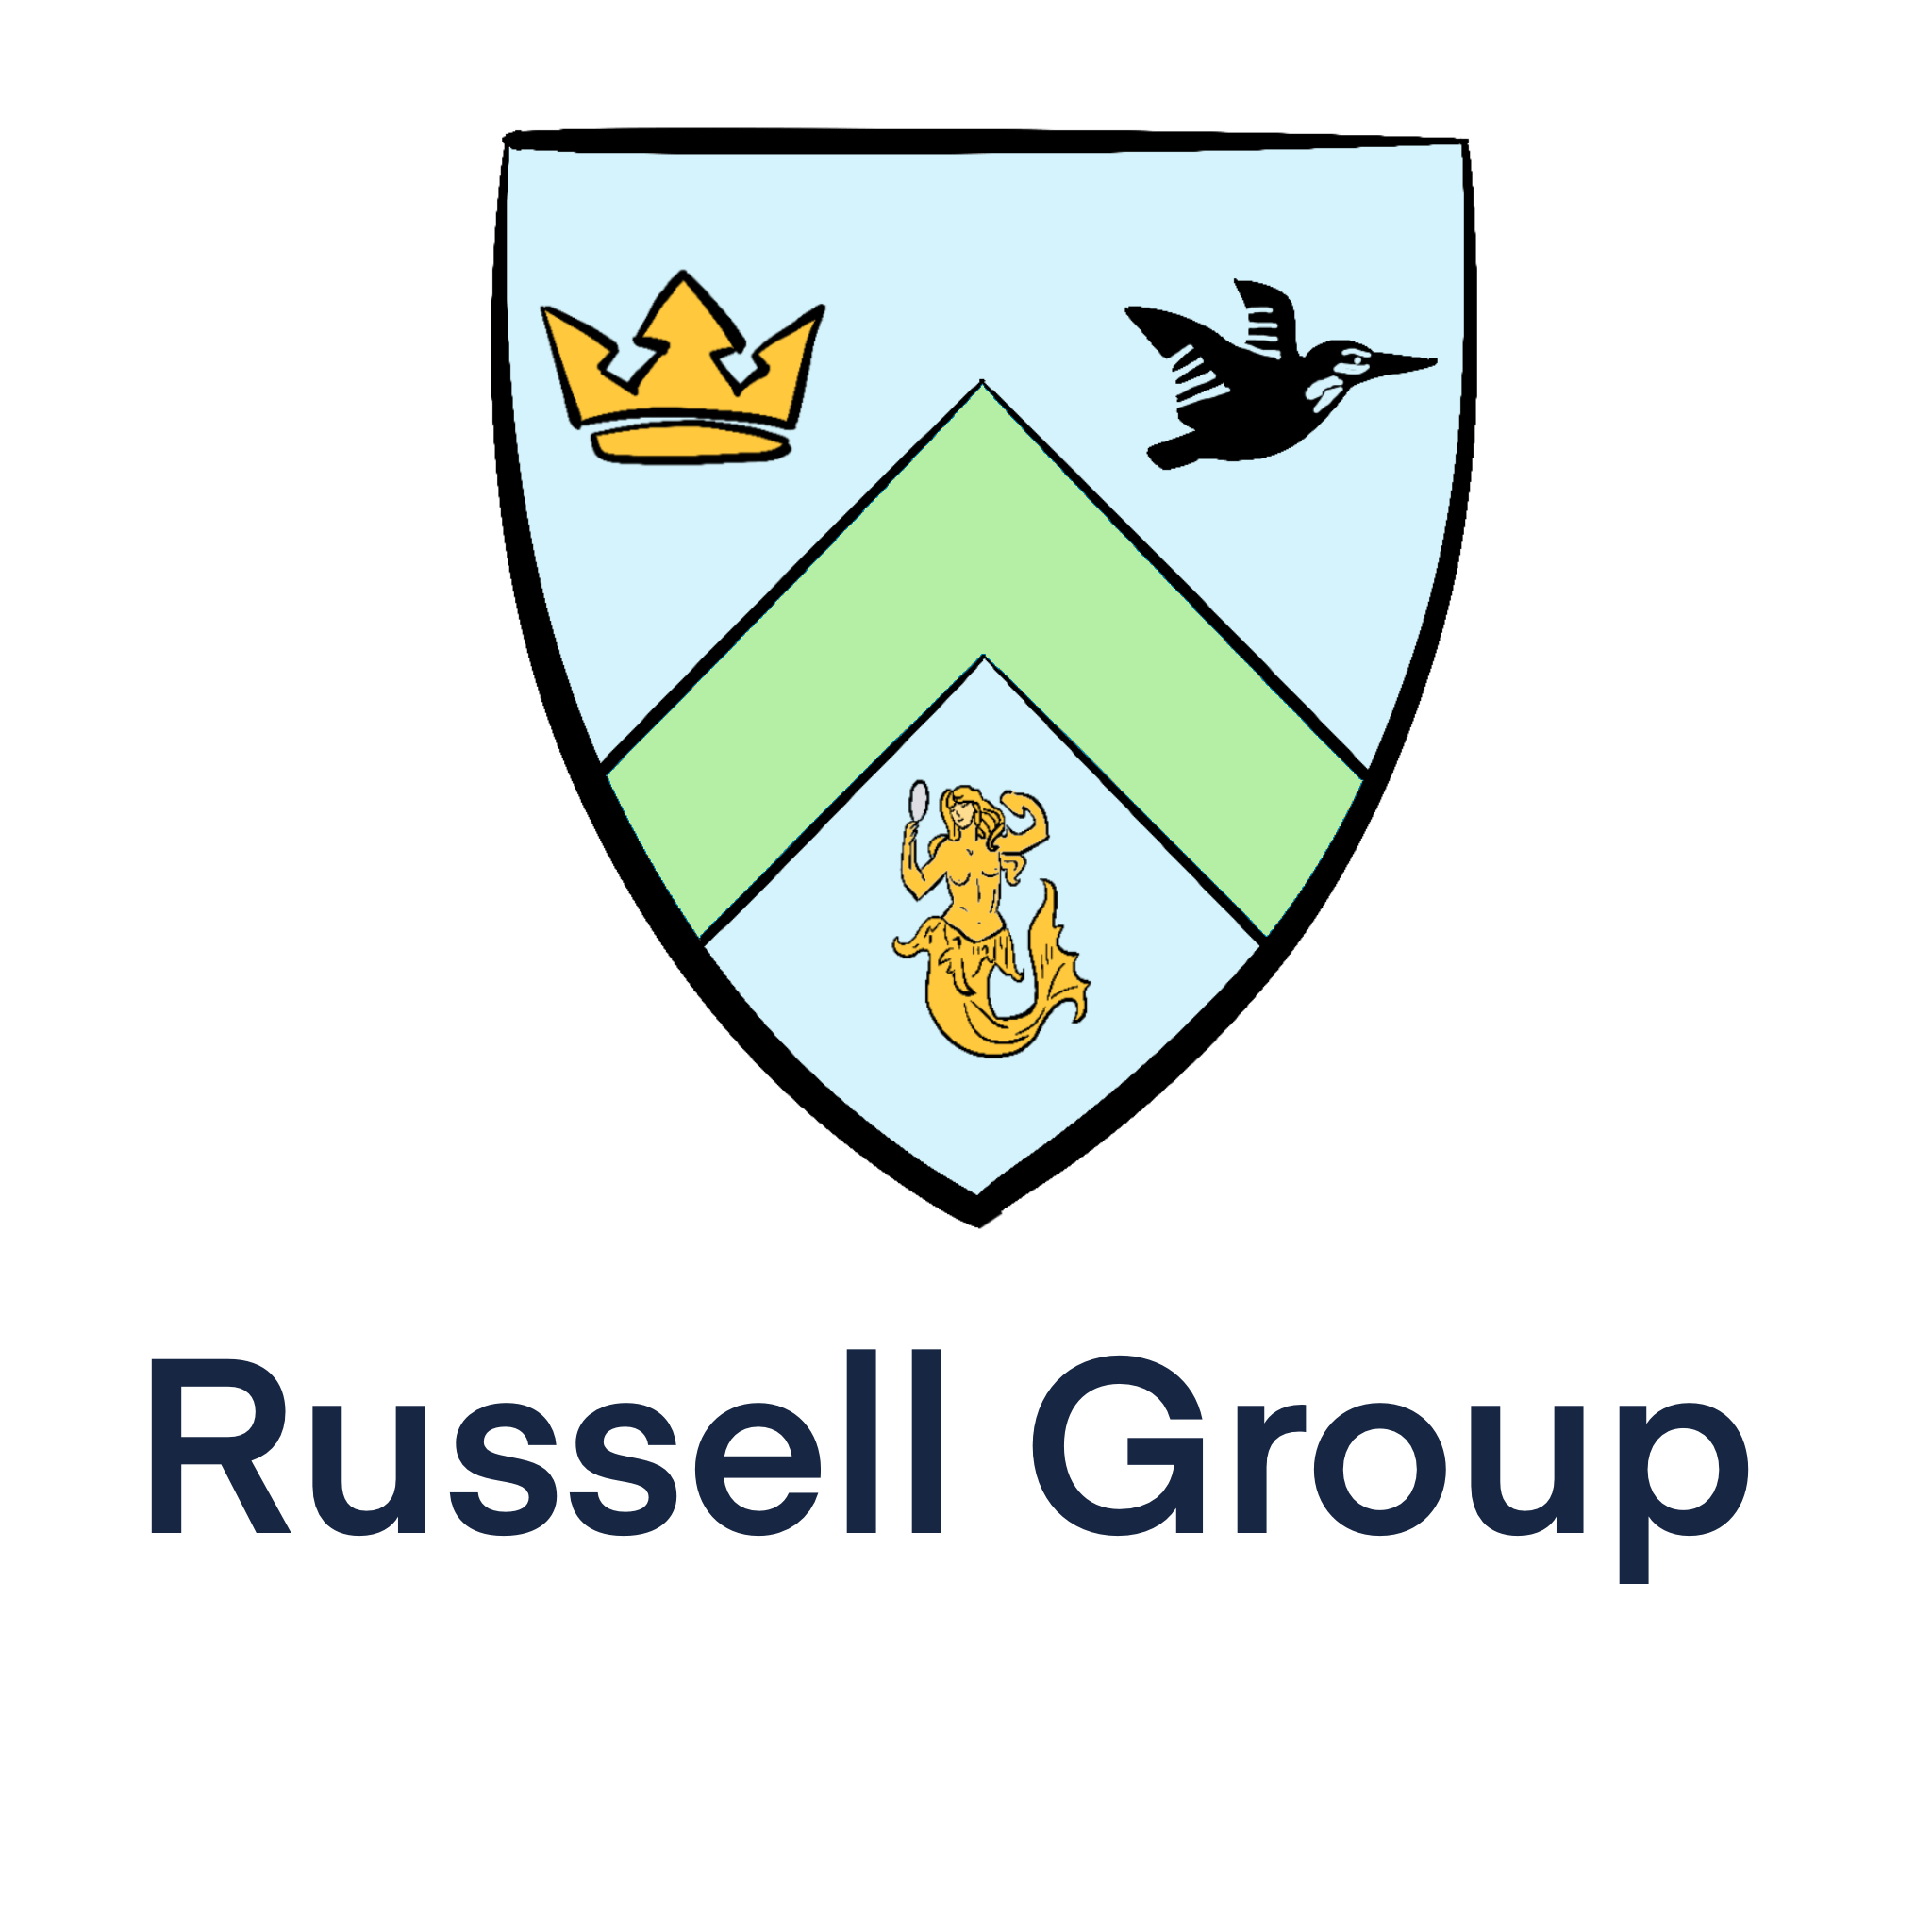 Phil holds a degree from a Russell Group University